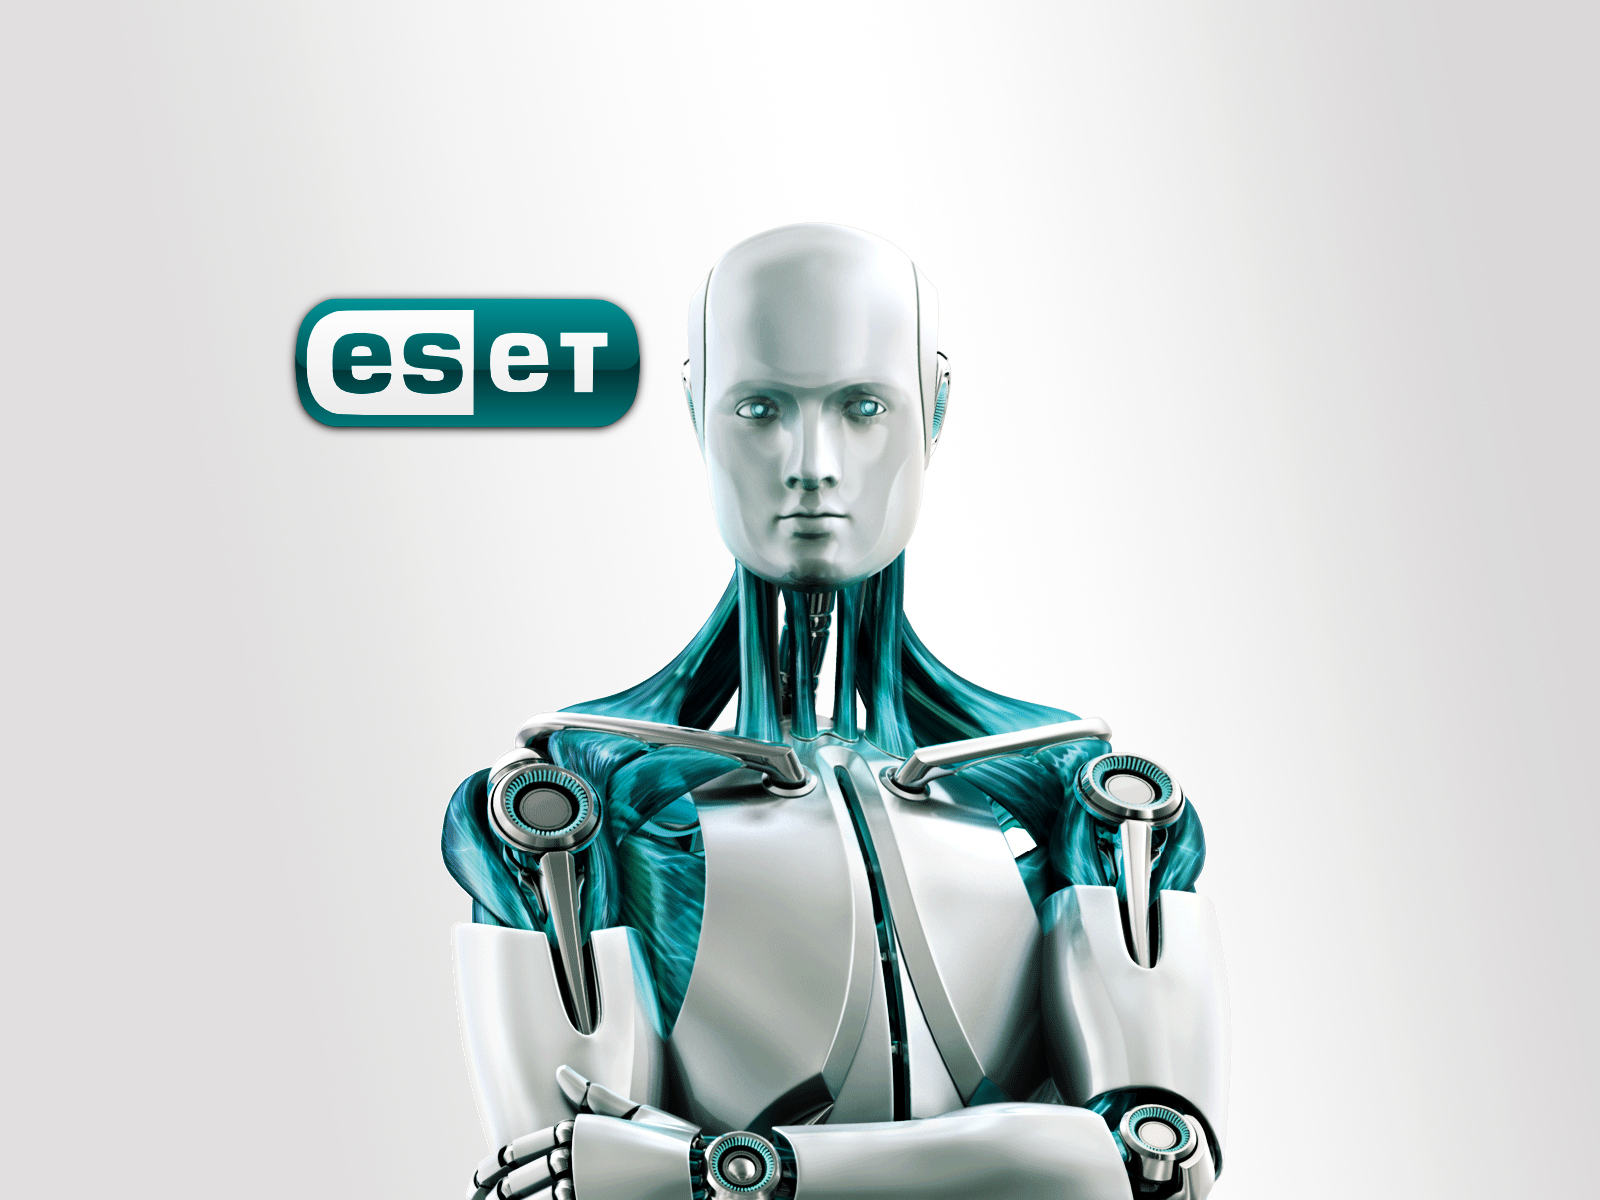 Eset Nod32 3D Robot HD Wallpapers picture for wallpaper